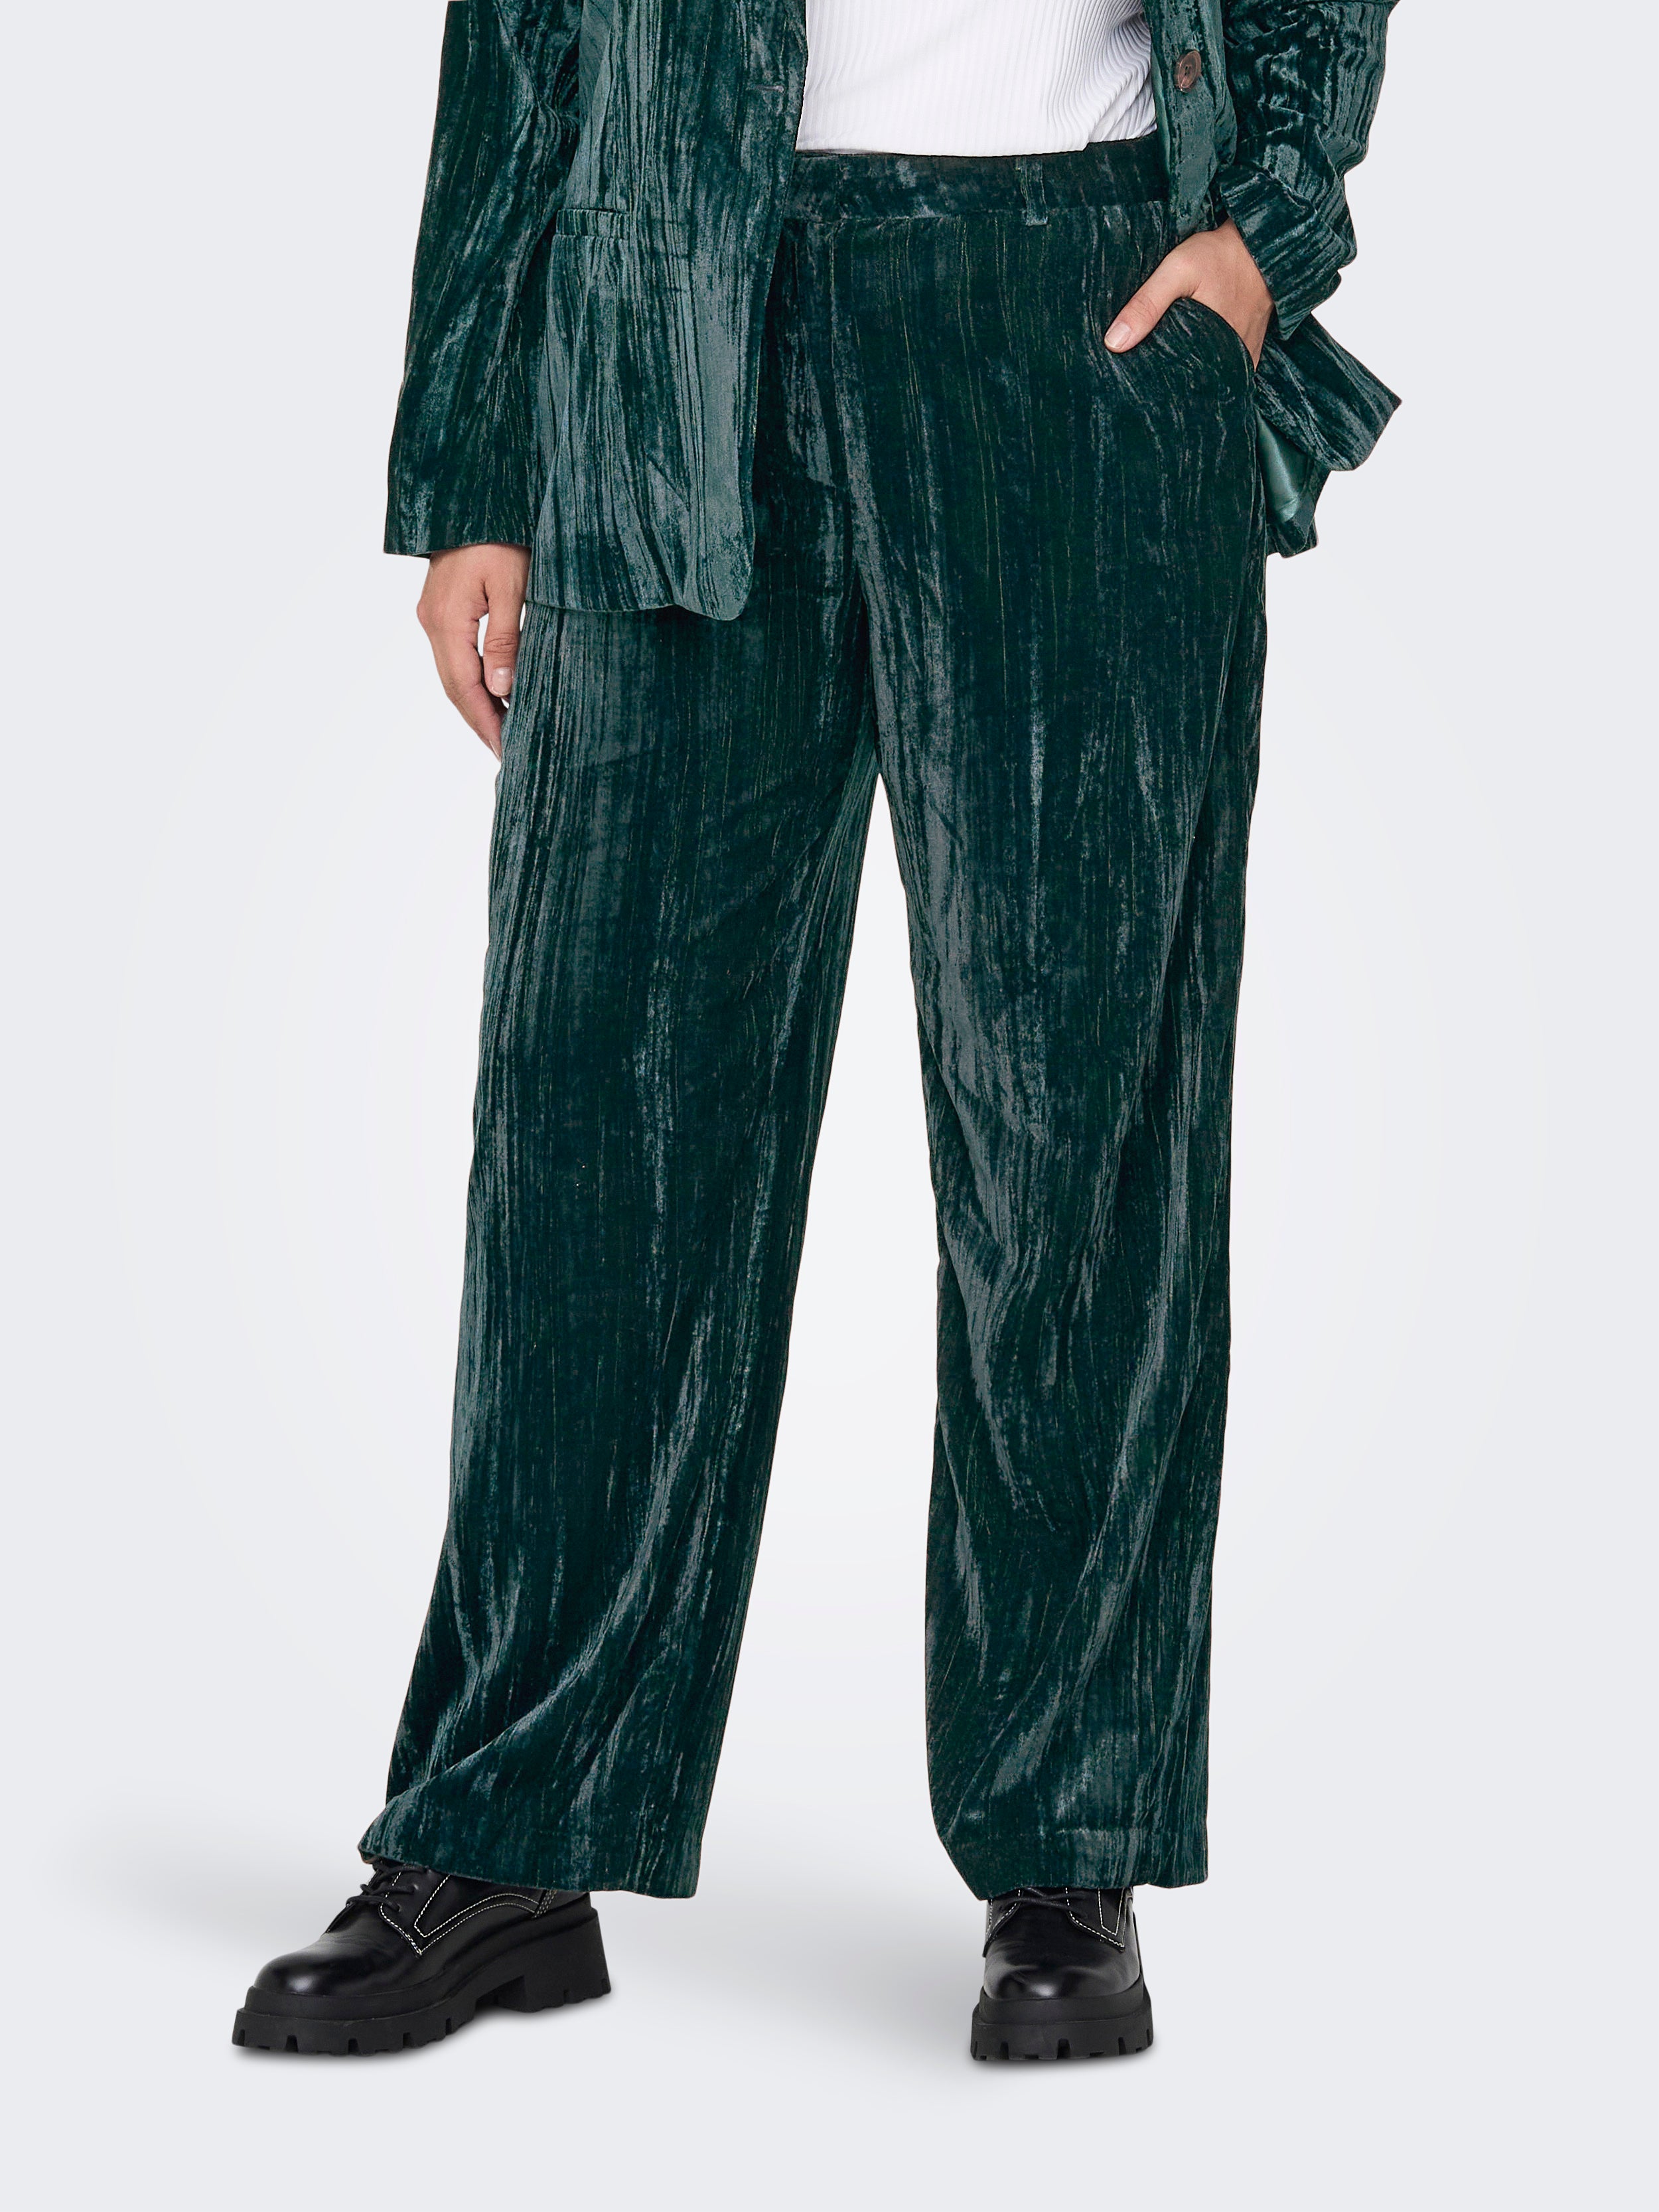 & OTHER STORIES Crushed Velvet Trousers | Endource